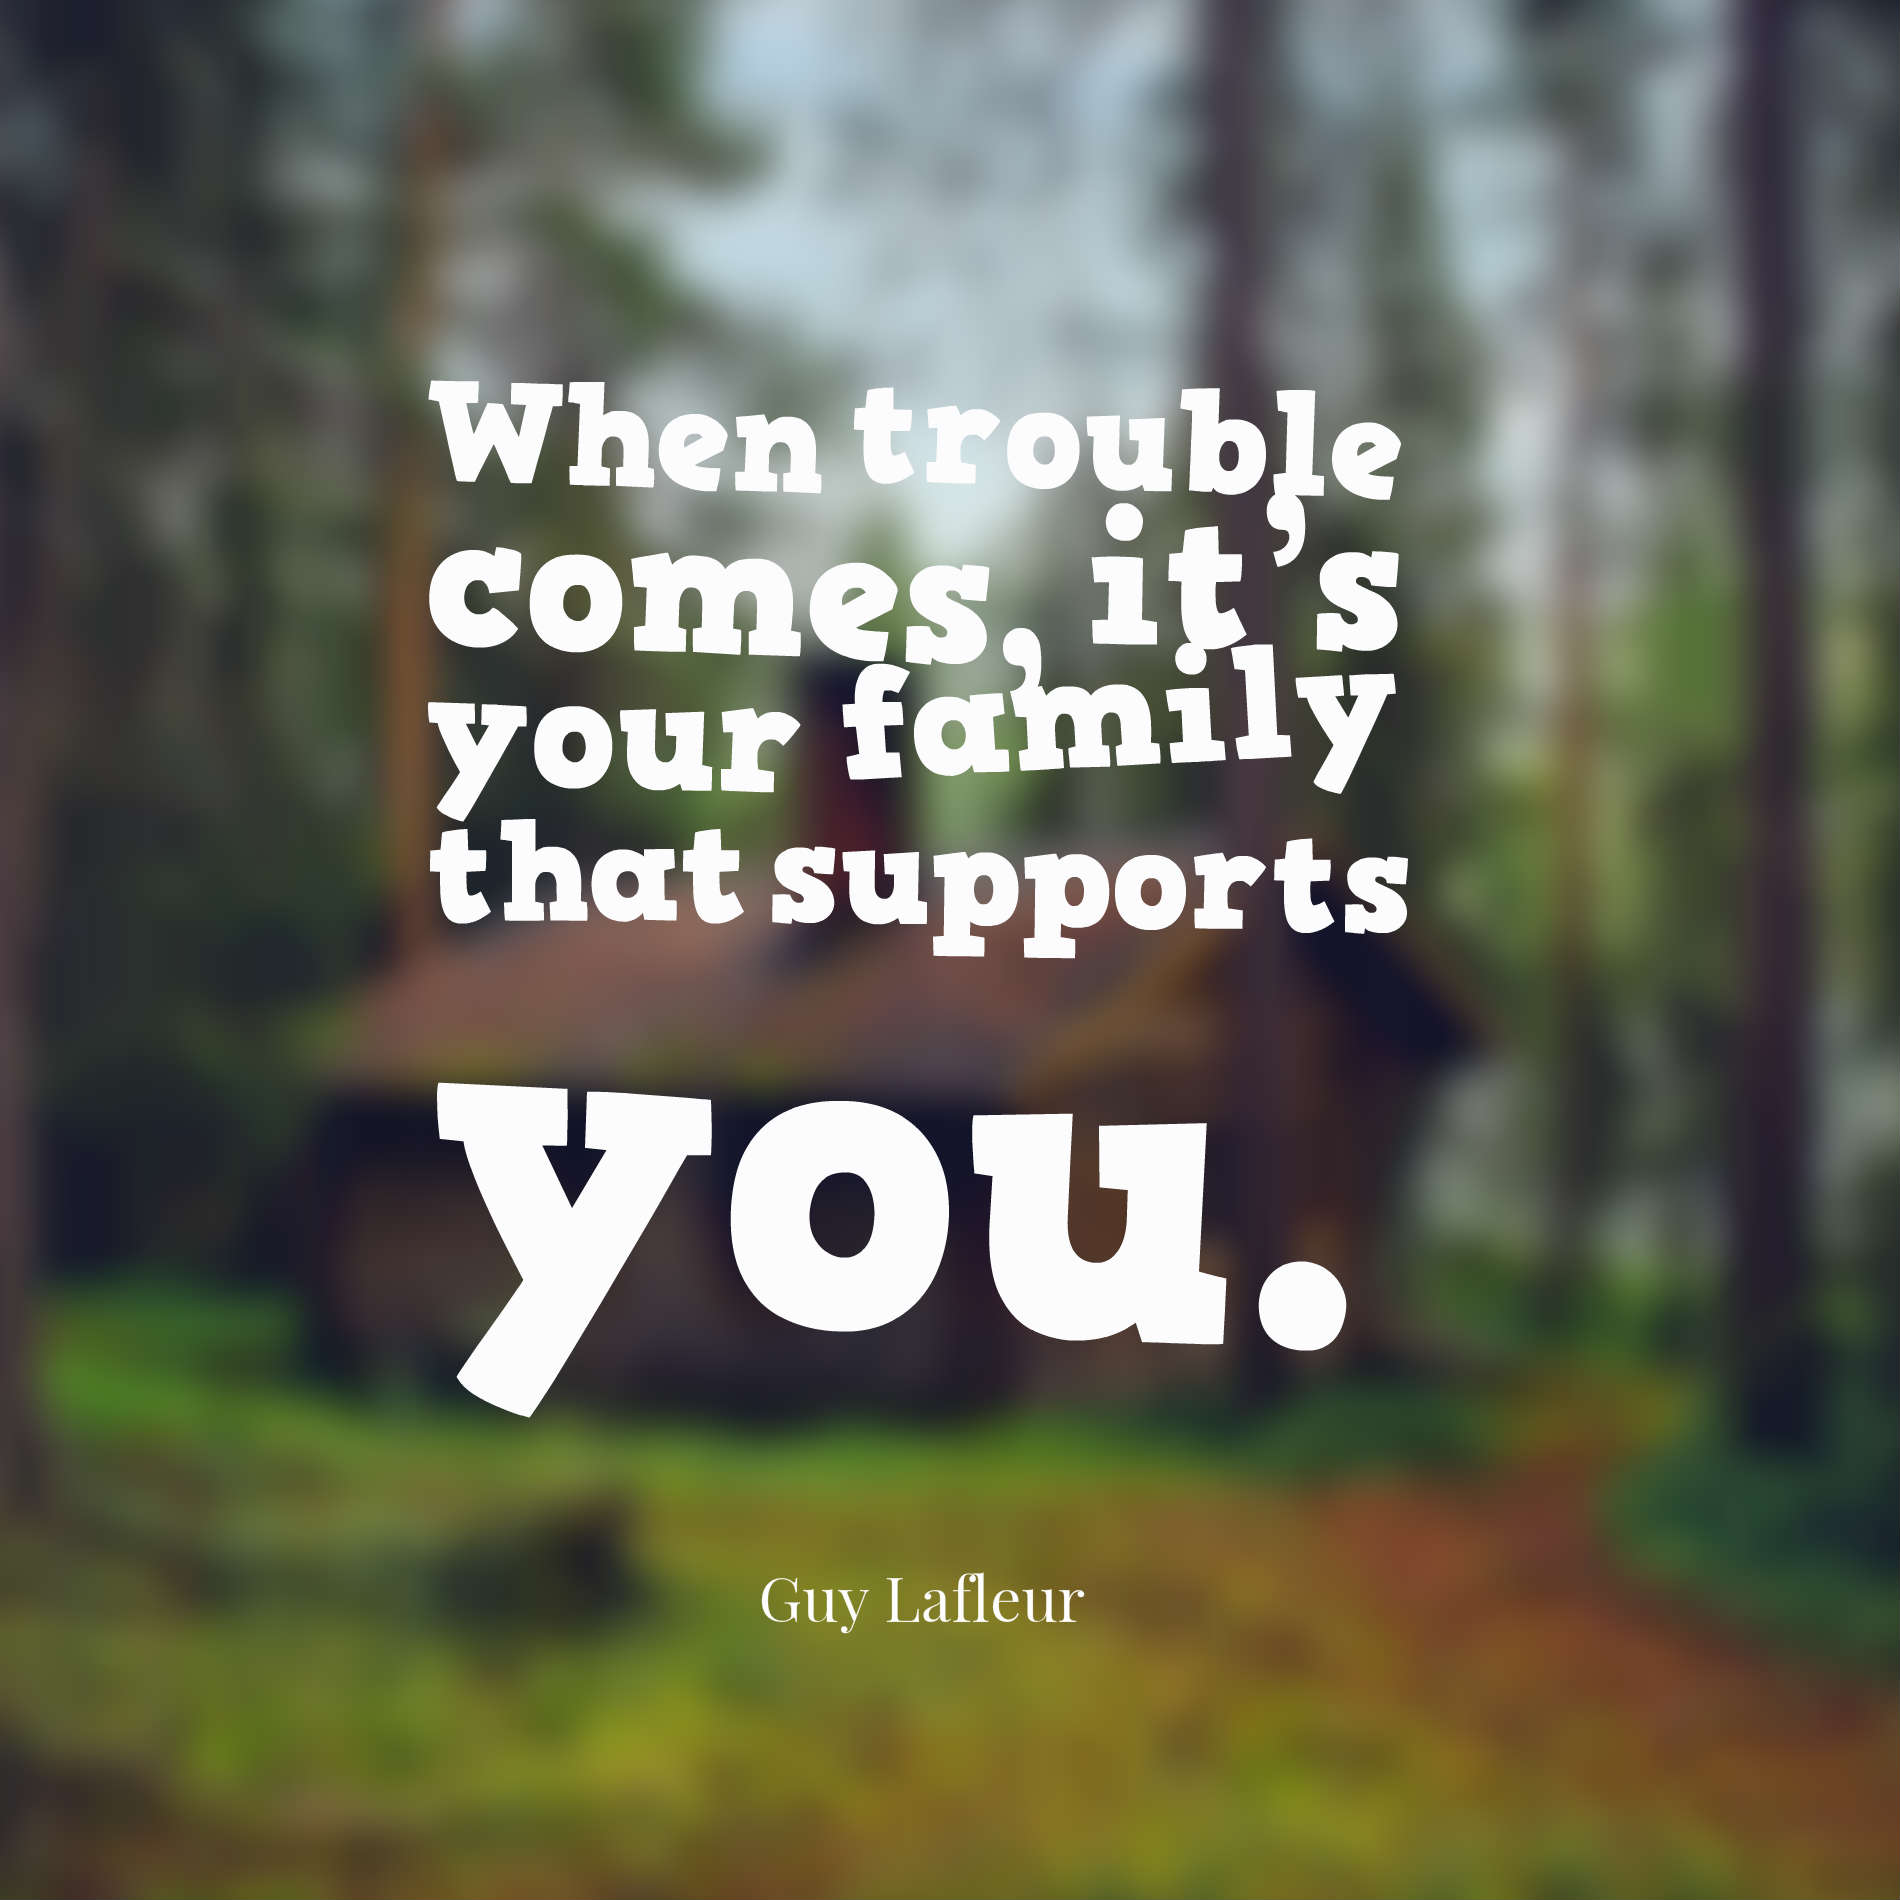 When trouble comes, it’s your family that supports you.